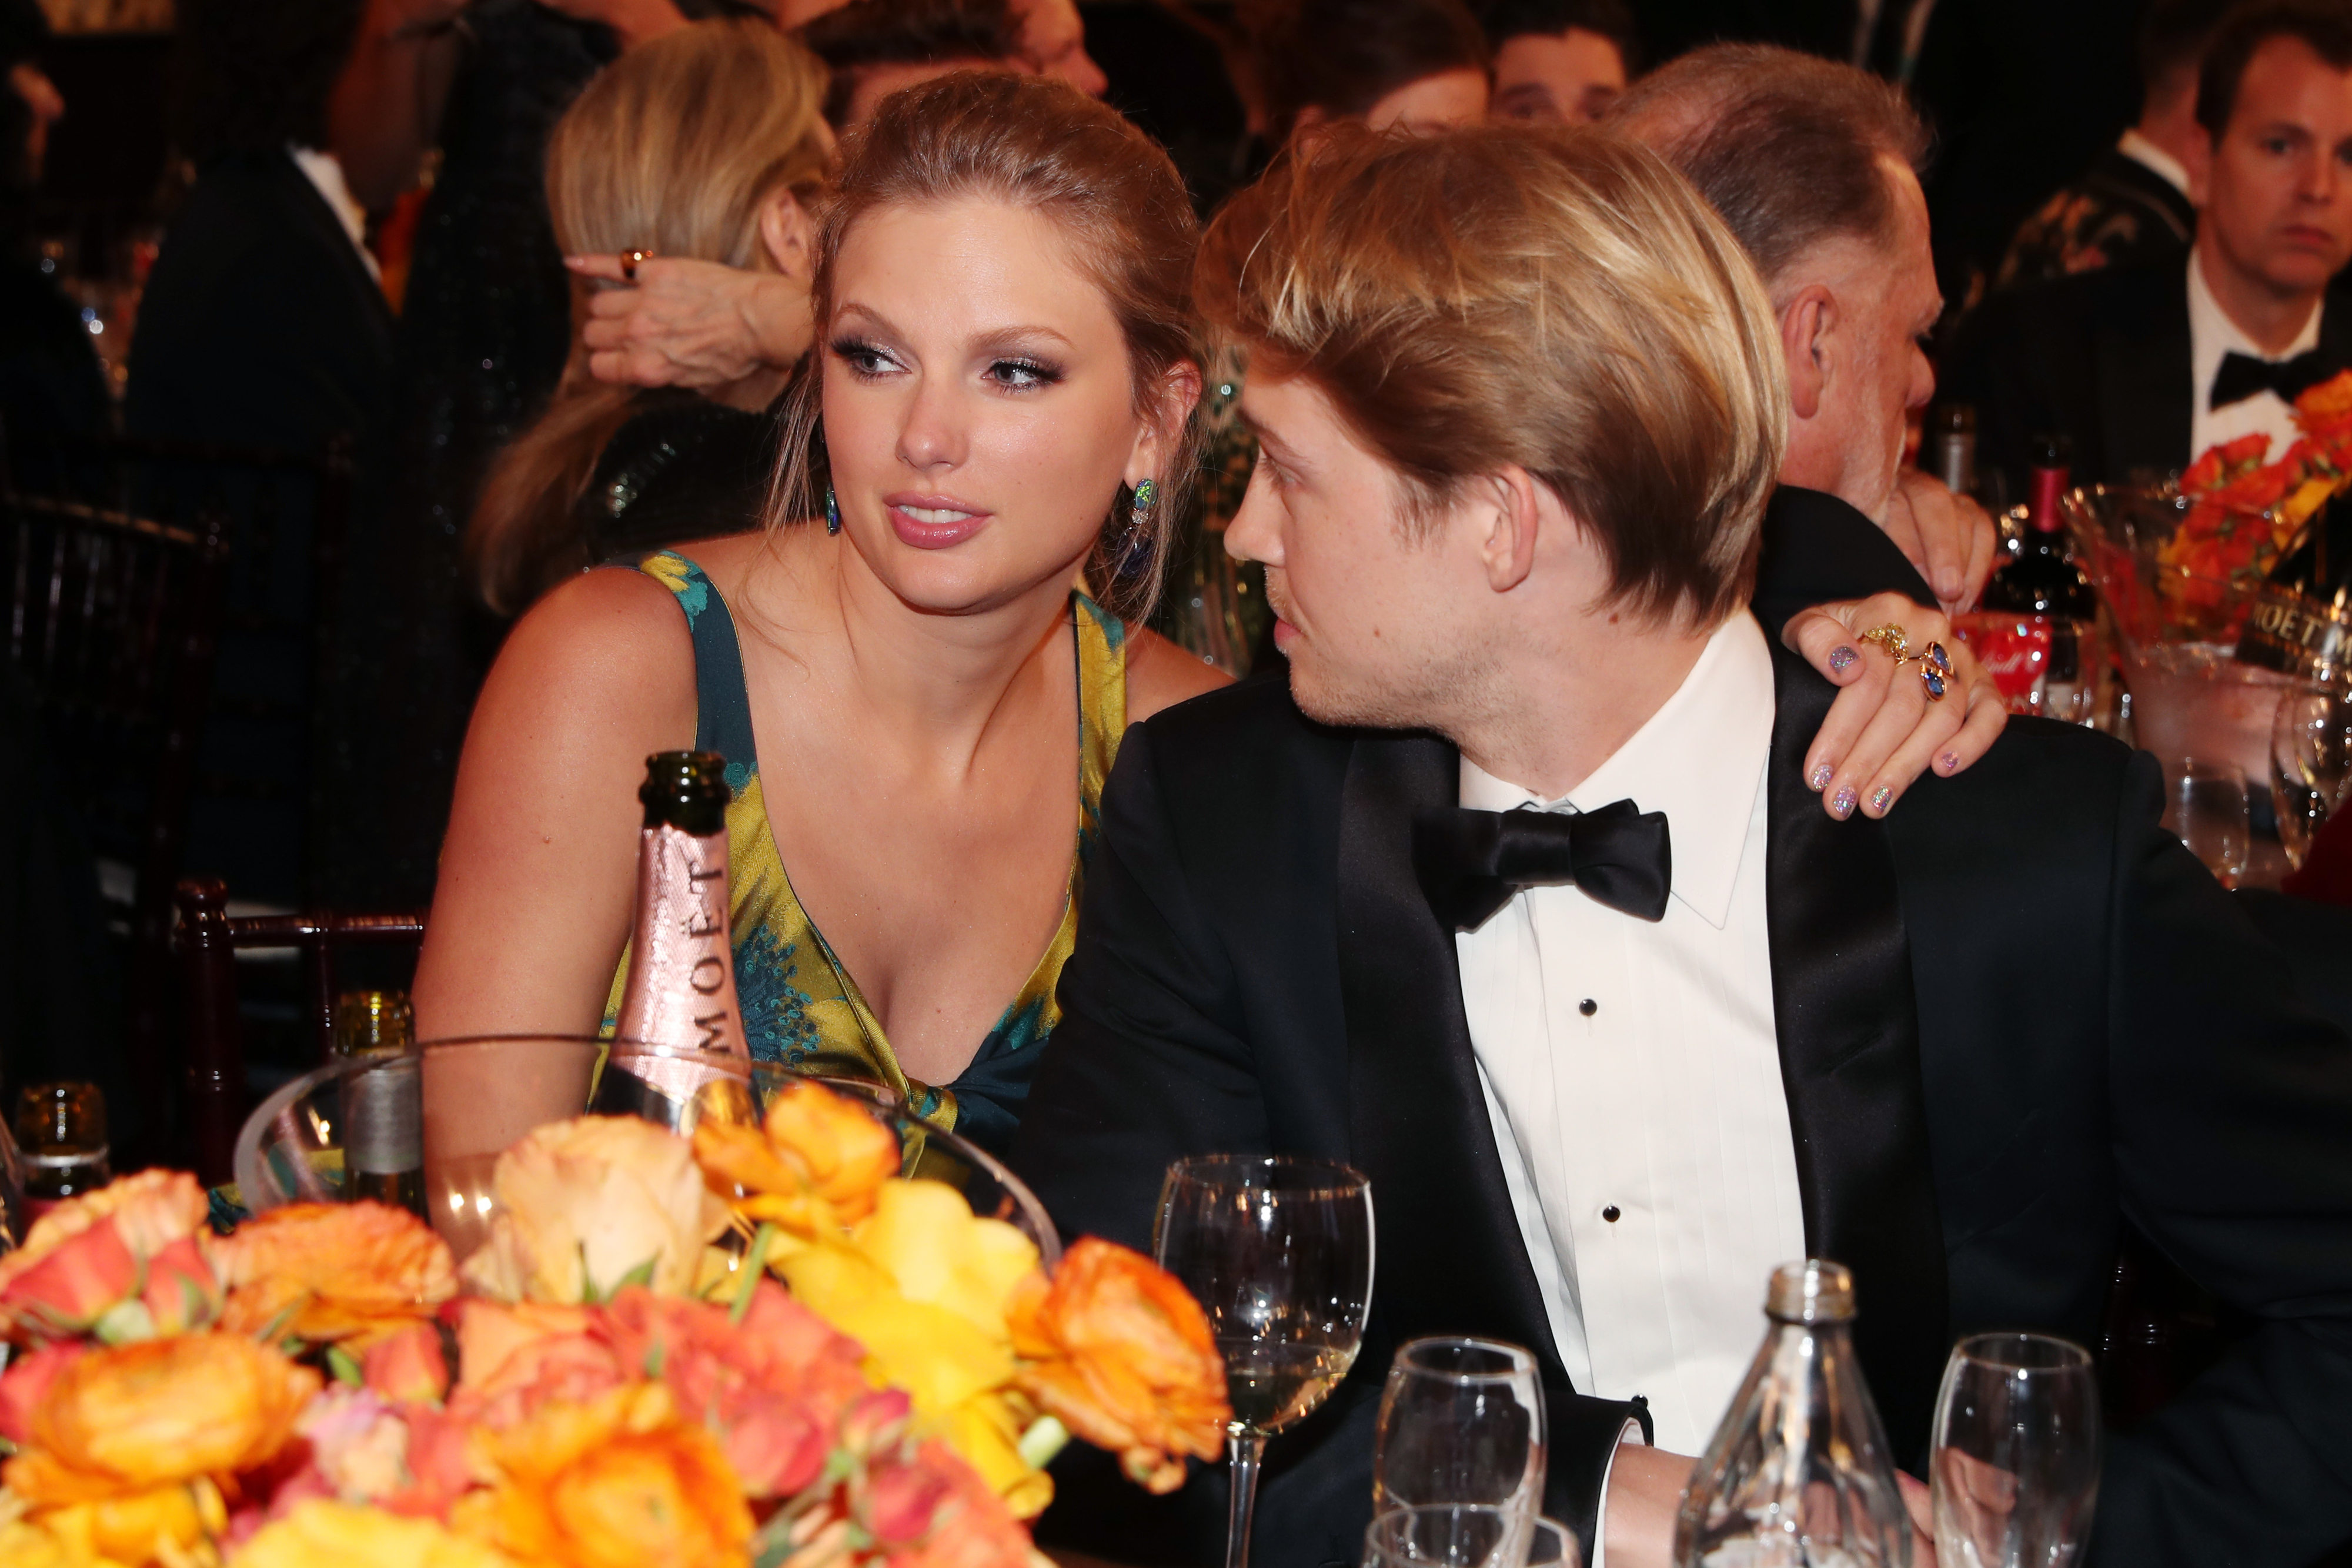 taylor with her arm around joe as they sit at a table